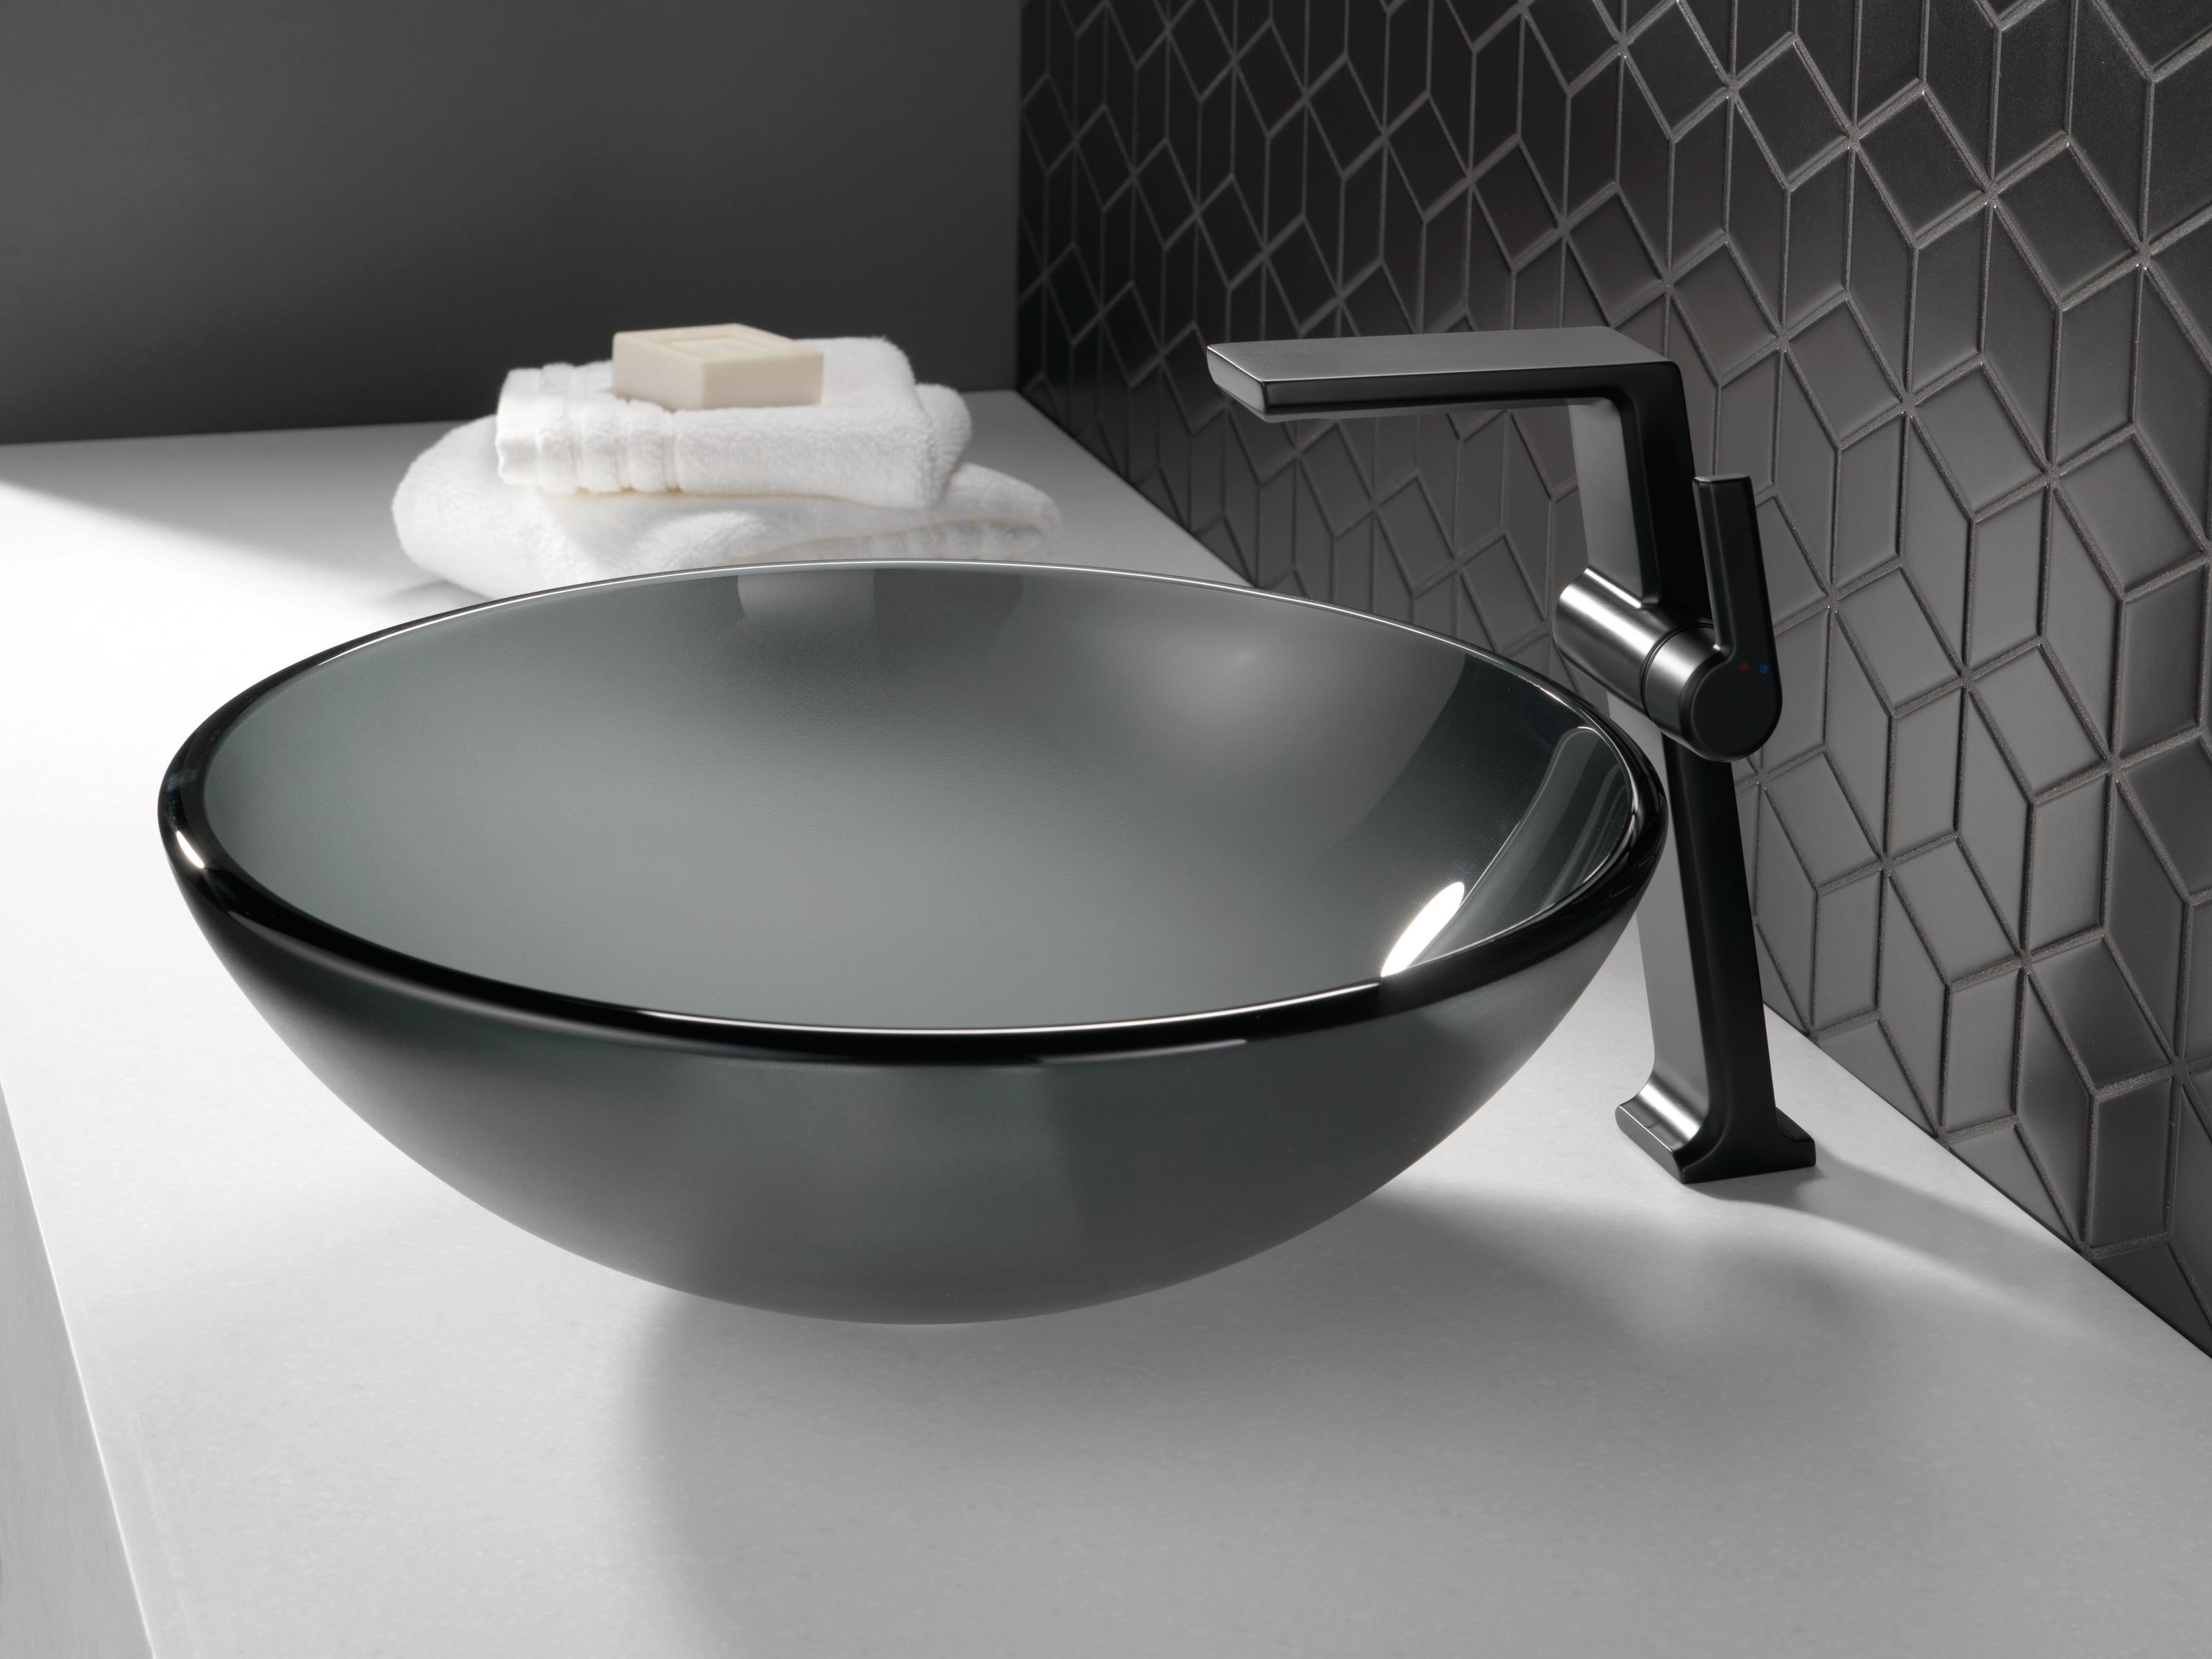 11 Modern Bath Faucets for Your Next Renovation